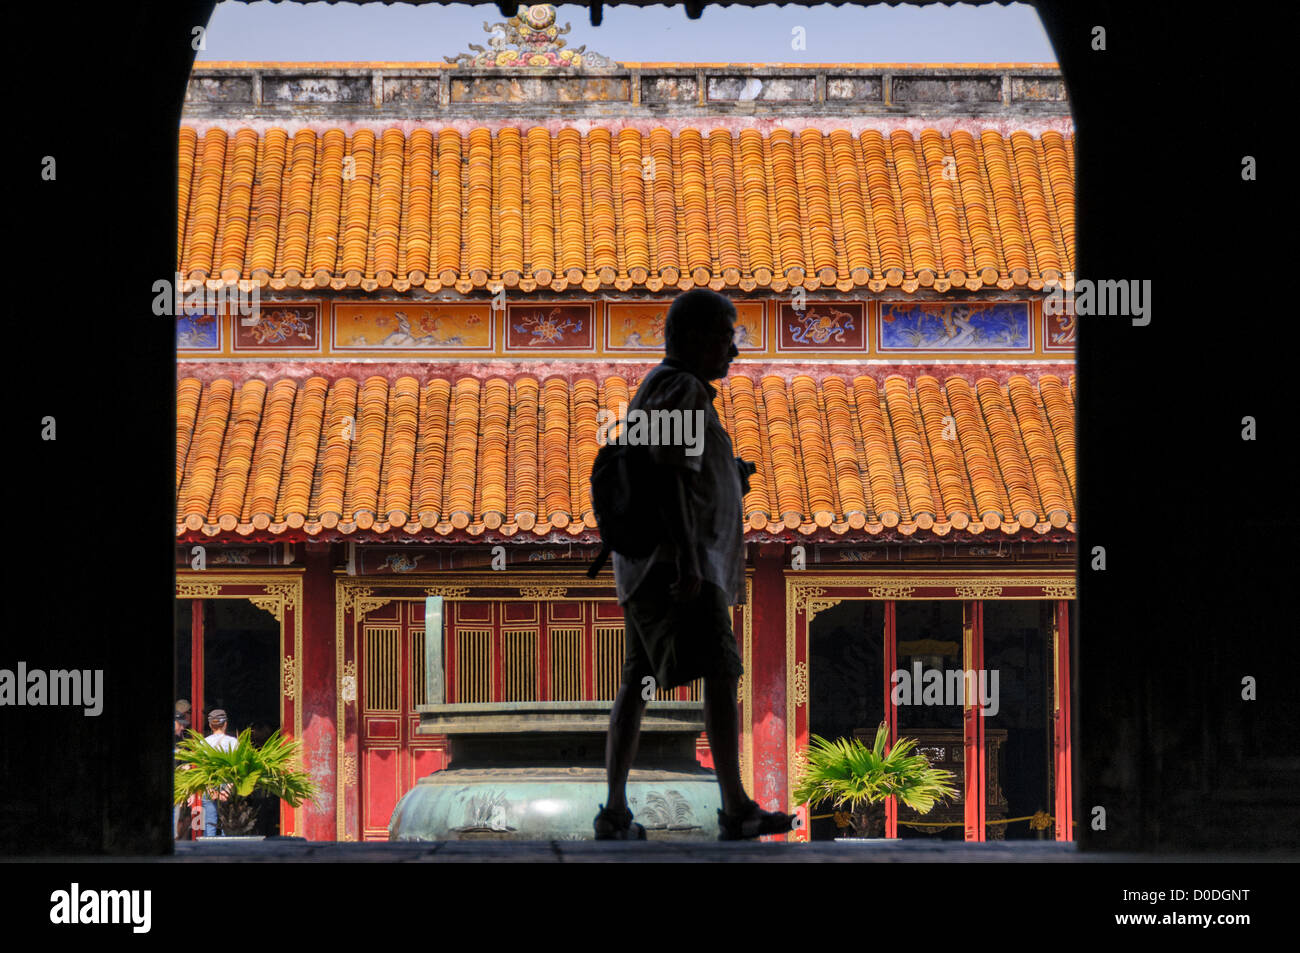 HUE, Vietnam - A tourist is silhouetted against To Mieu Temple at the Imperial City in Hue, Vietnam. A self-enclosed and fortified palace, the complex includes the Purple Forbidden City, which was the inner sanctum of the imperial household, as well as temples, courtyards, gardens, and other buildings. Much of the Imperial City was damaged or destroyed during the Vietnam War. It is now designated as a UNESCO World Heritage site. Stock Photo